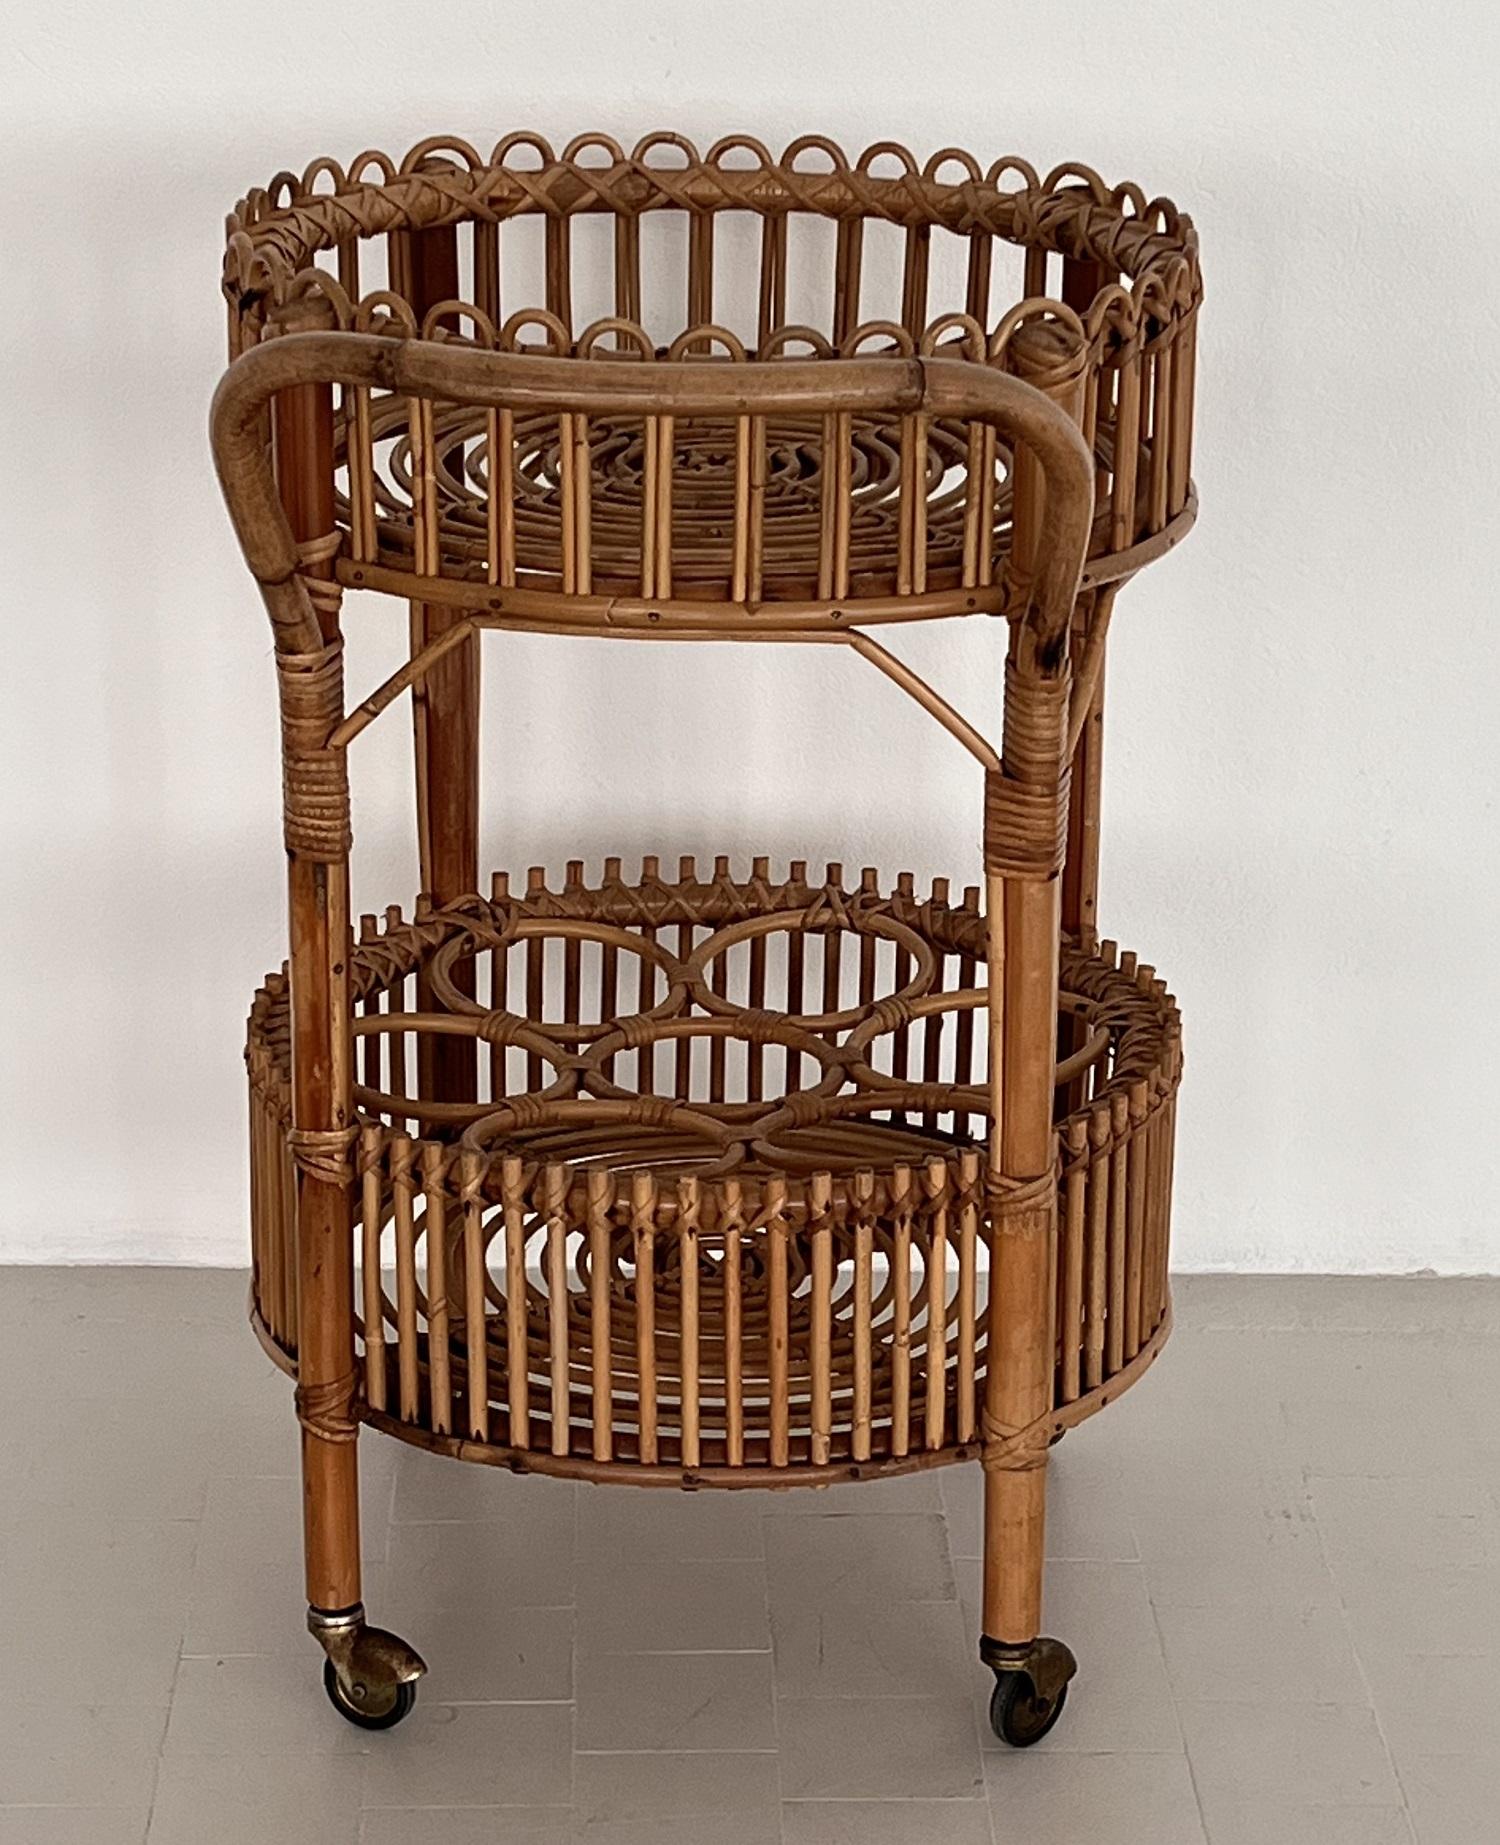 Gorgeous bar cart or trolley made of curved bamboo and rattan during the Italian mid-century in the 1960s.
The cart is circular with two tiers, handle, and rings on lower shelf to hold up to 7 bottles. 
The four rollers are rolling